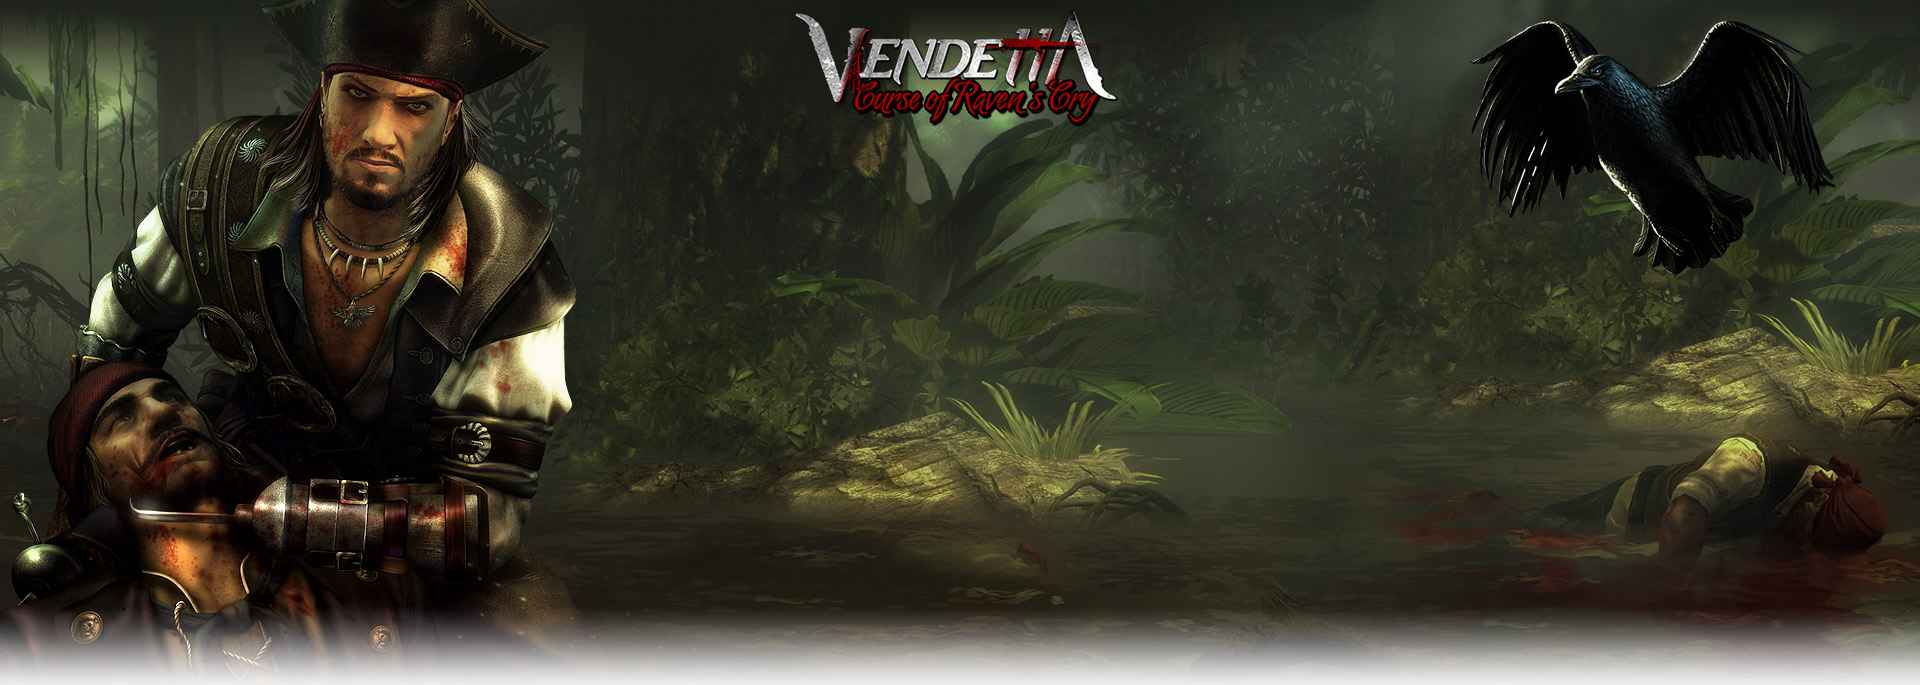 Vendetta - Curse of Raven's Cry Steam CD Key - background